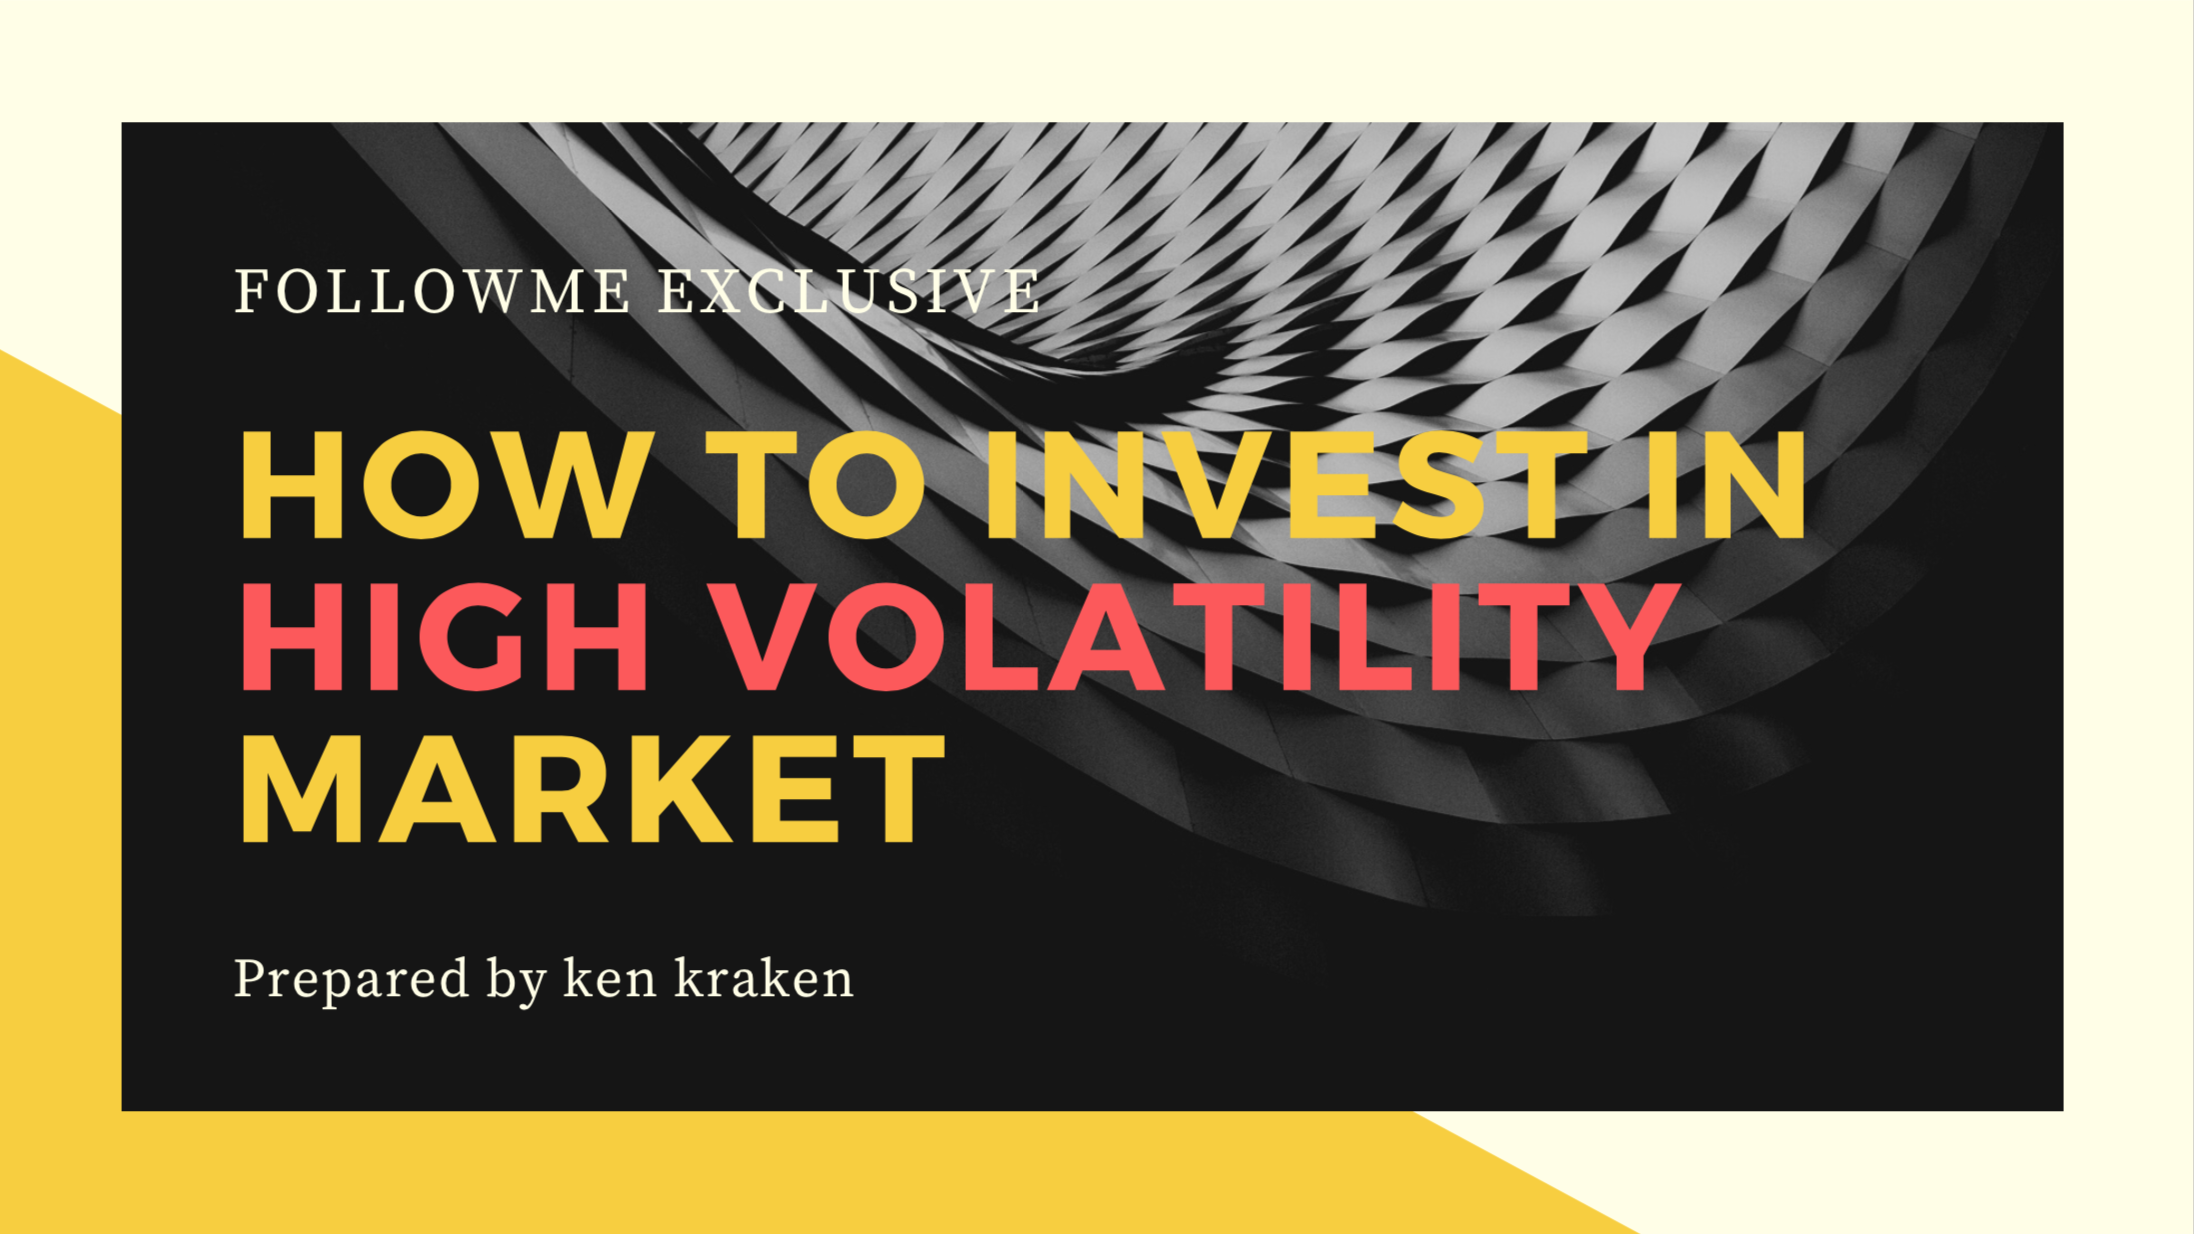 How to Invest in High Volatility Market--Review on FolloWebinar with Ken Kraken